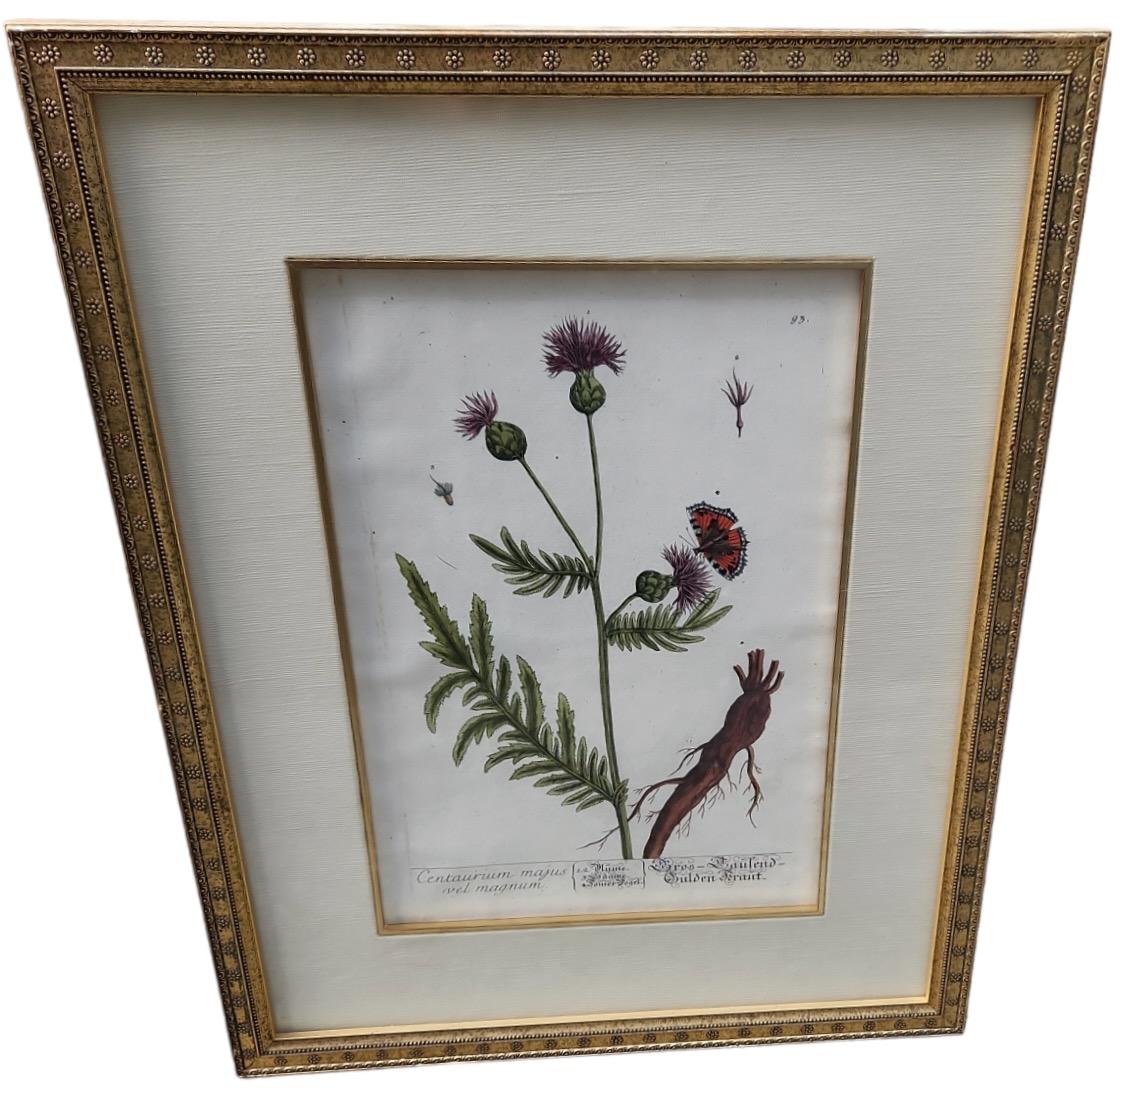 Hand-Crafted 18th Century Elizabeth Blackwell Hand Tinted Botanicals - 4 Available For Sale